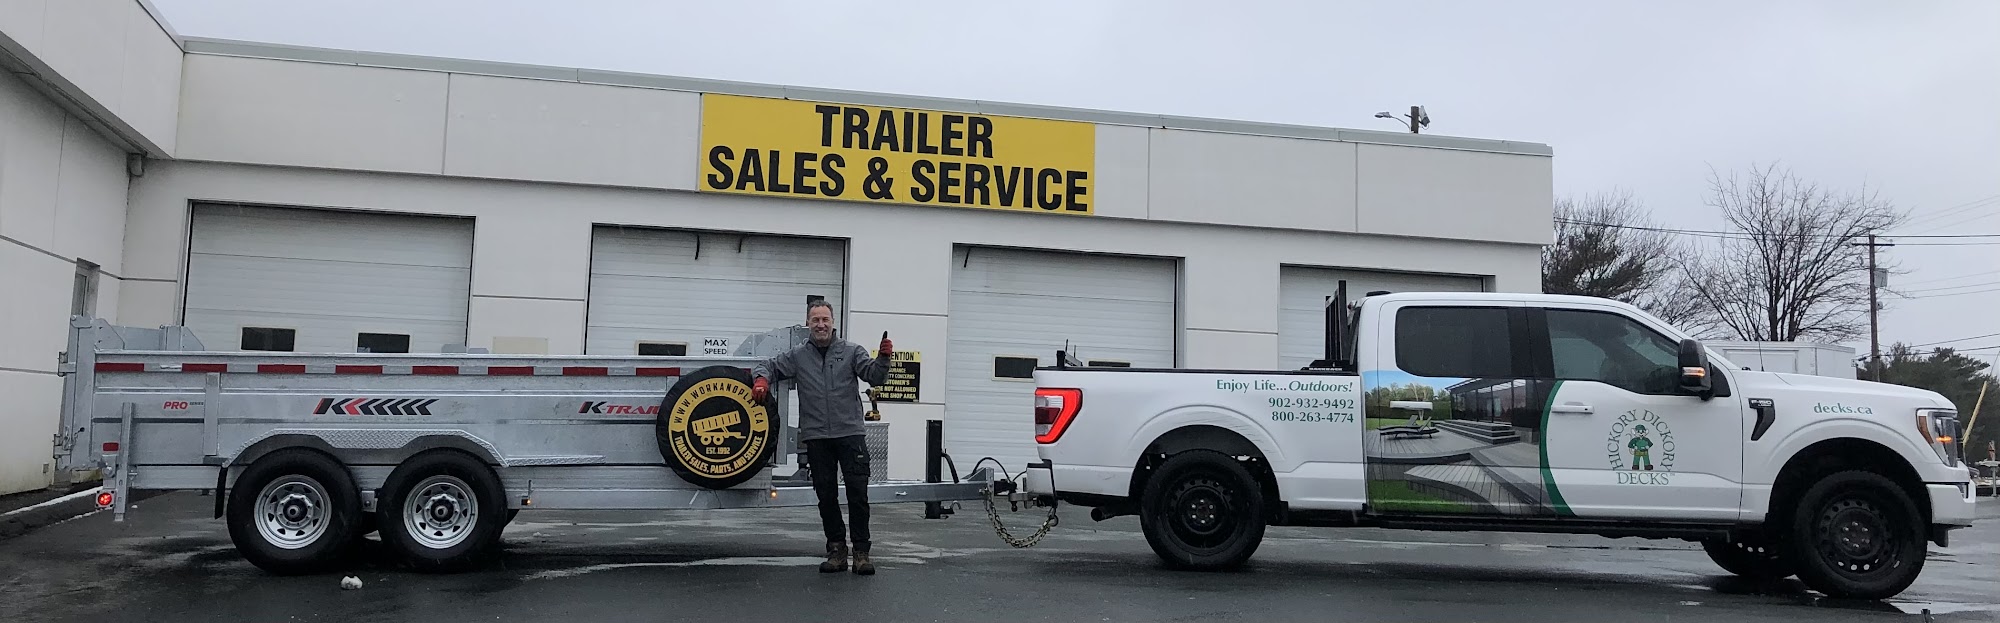 Work & Play - Trailer Sales and Service